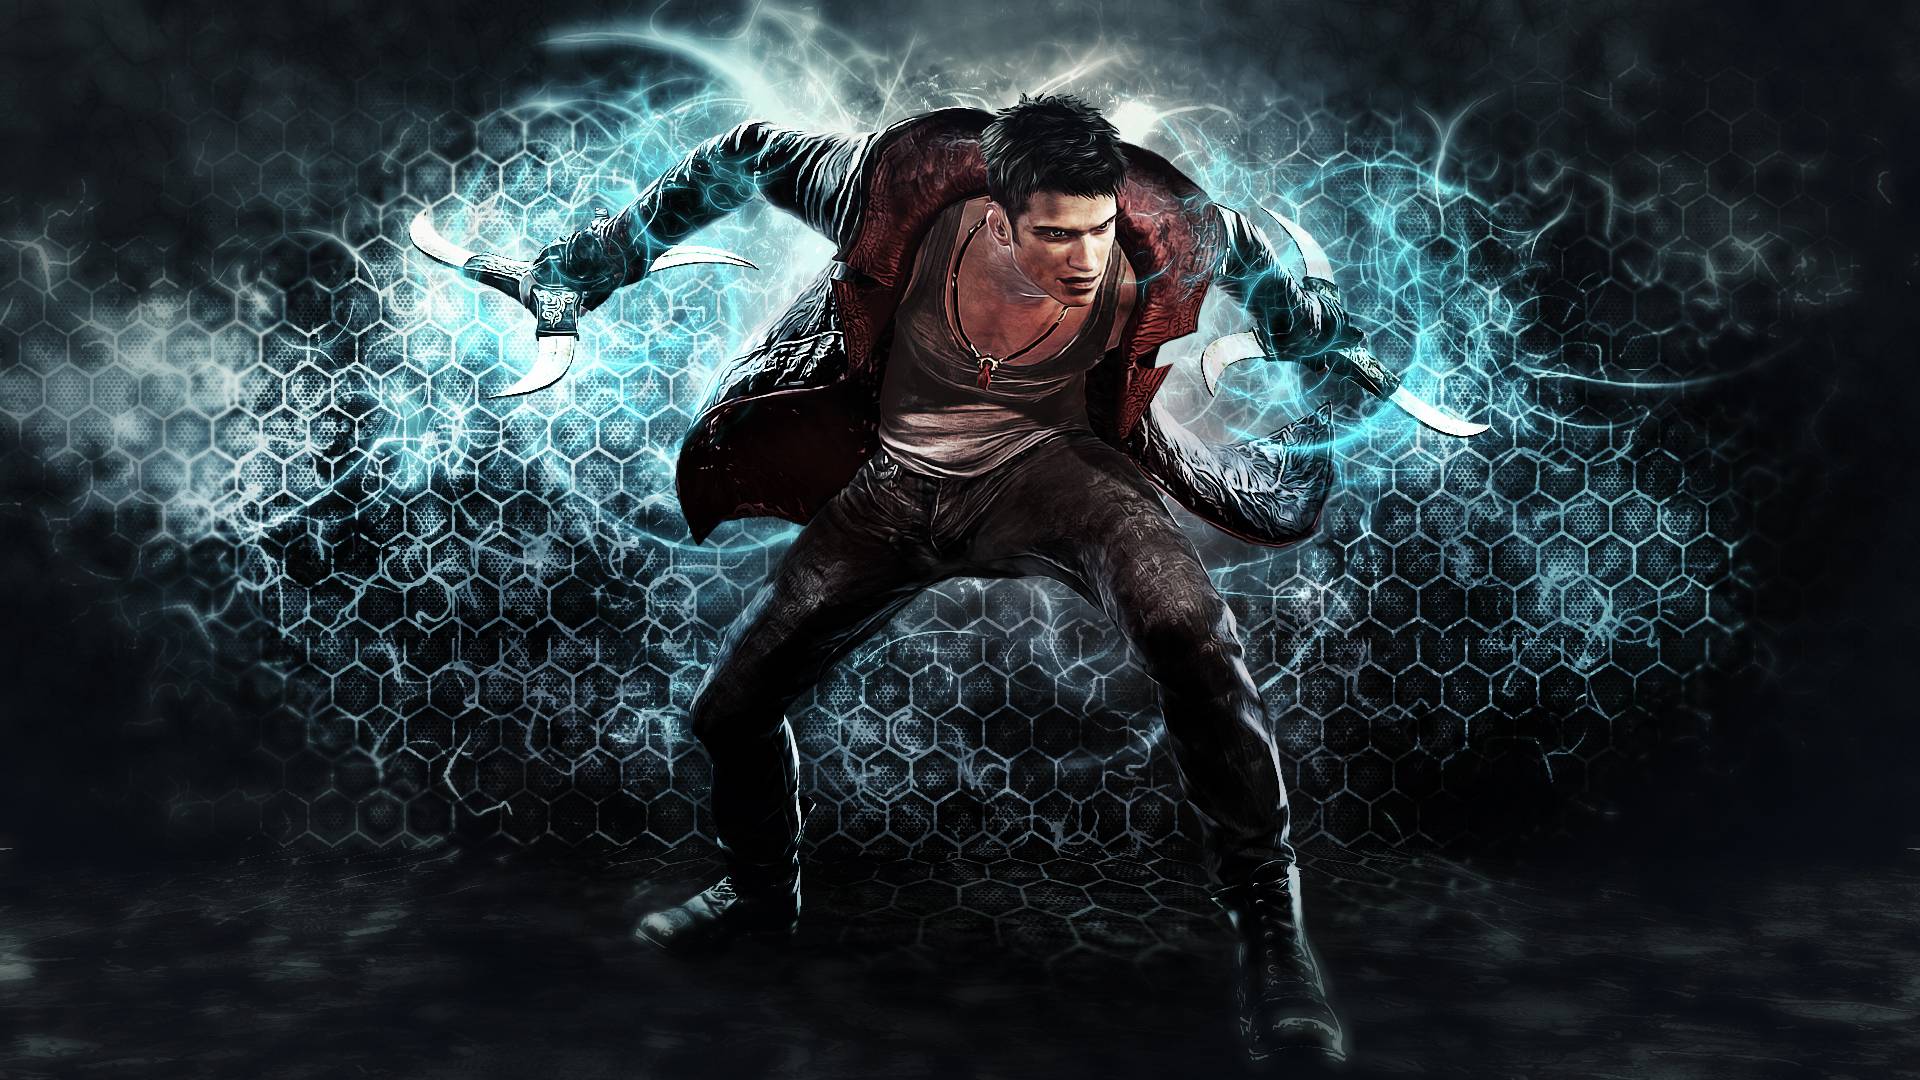 Devil May Cry Wallpaper 1920x1080 41714 HD Picture. Top